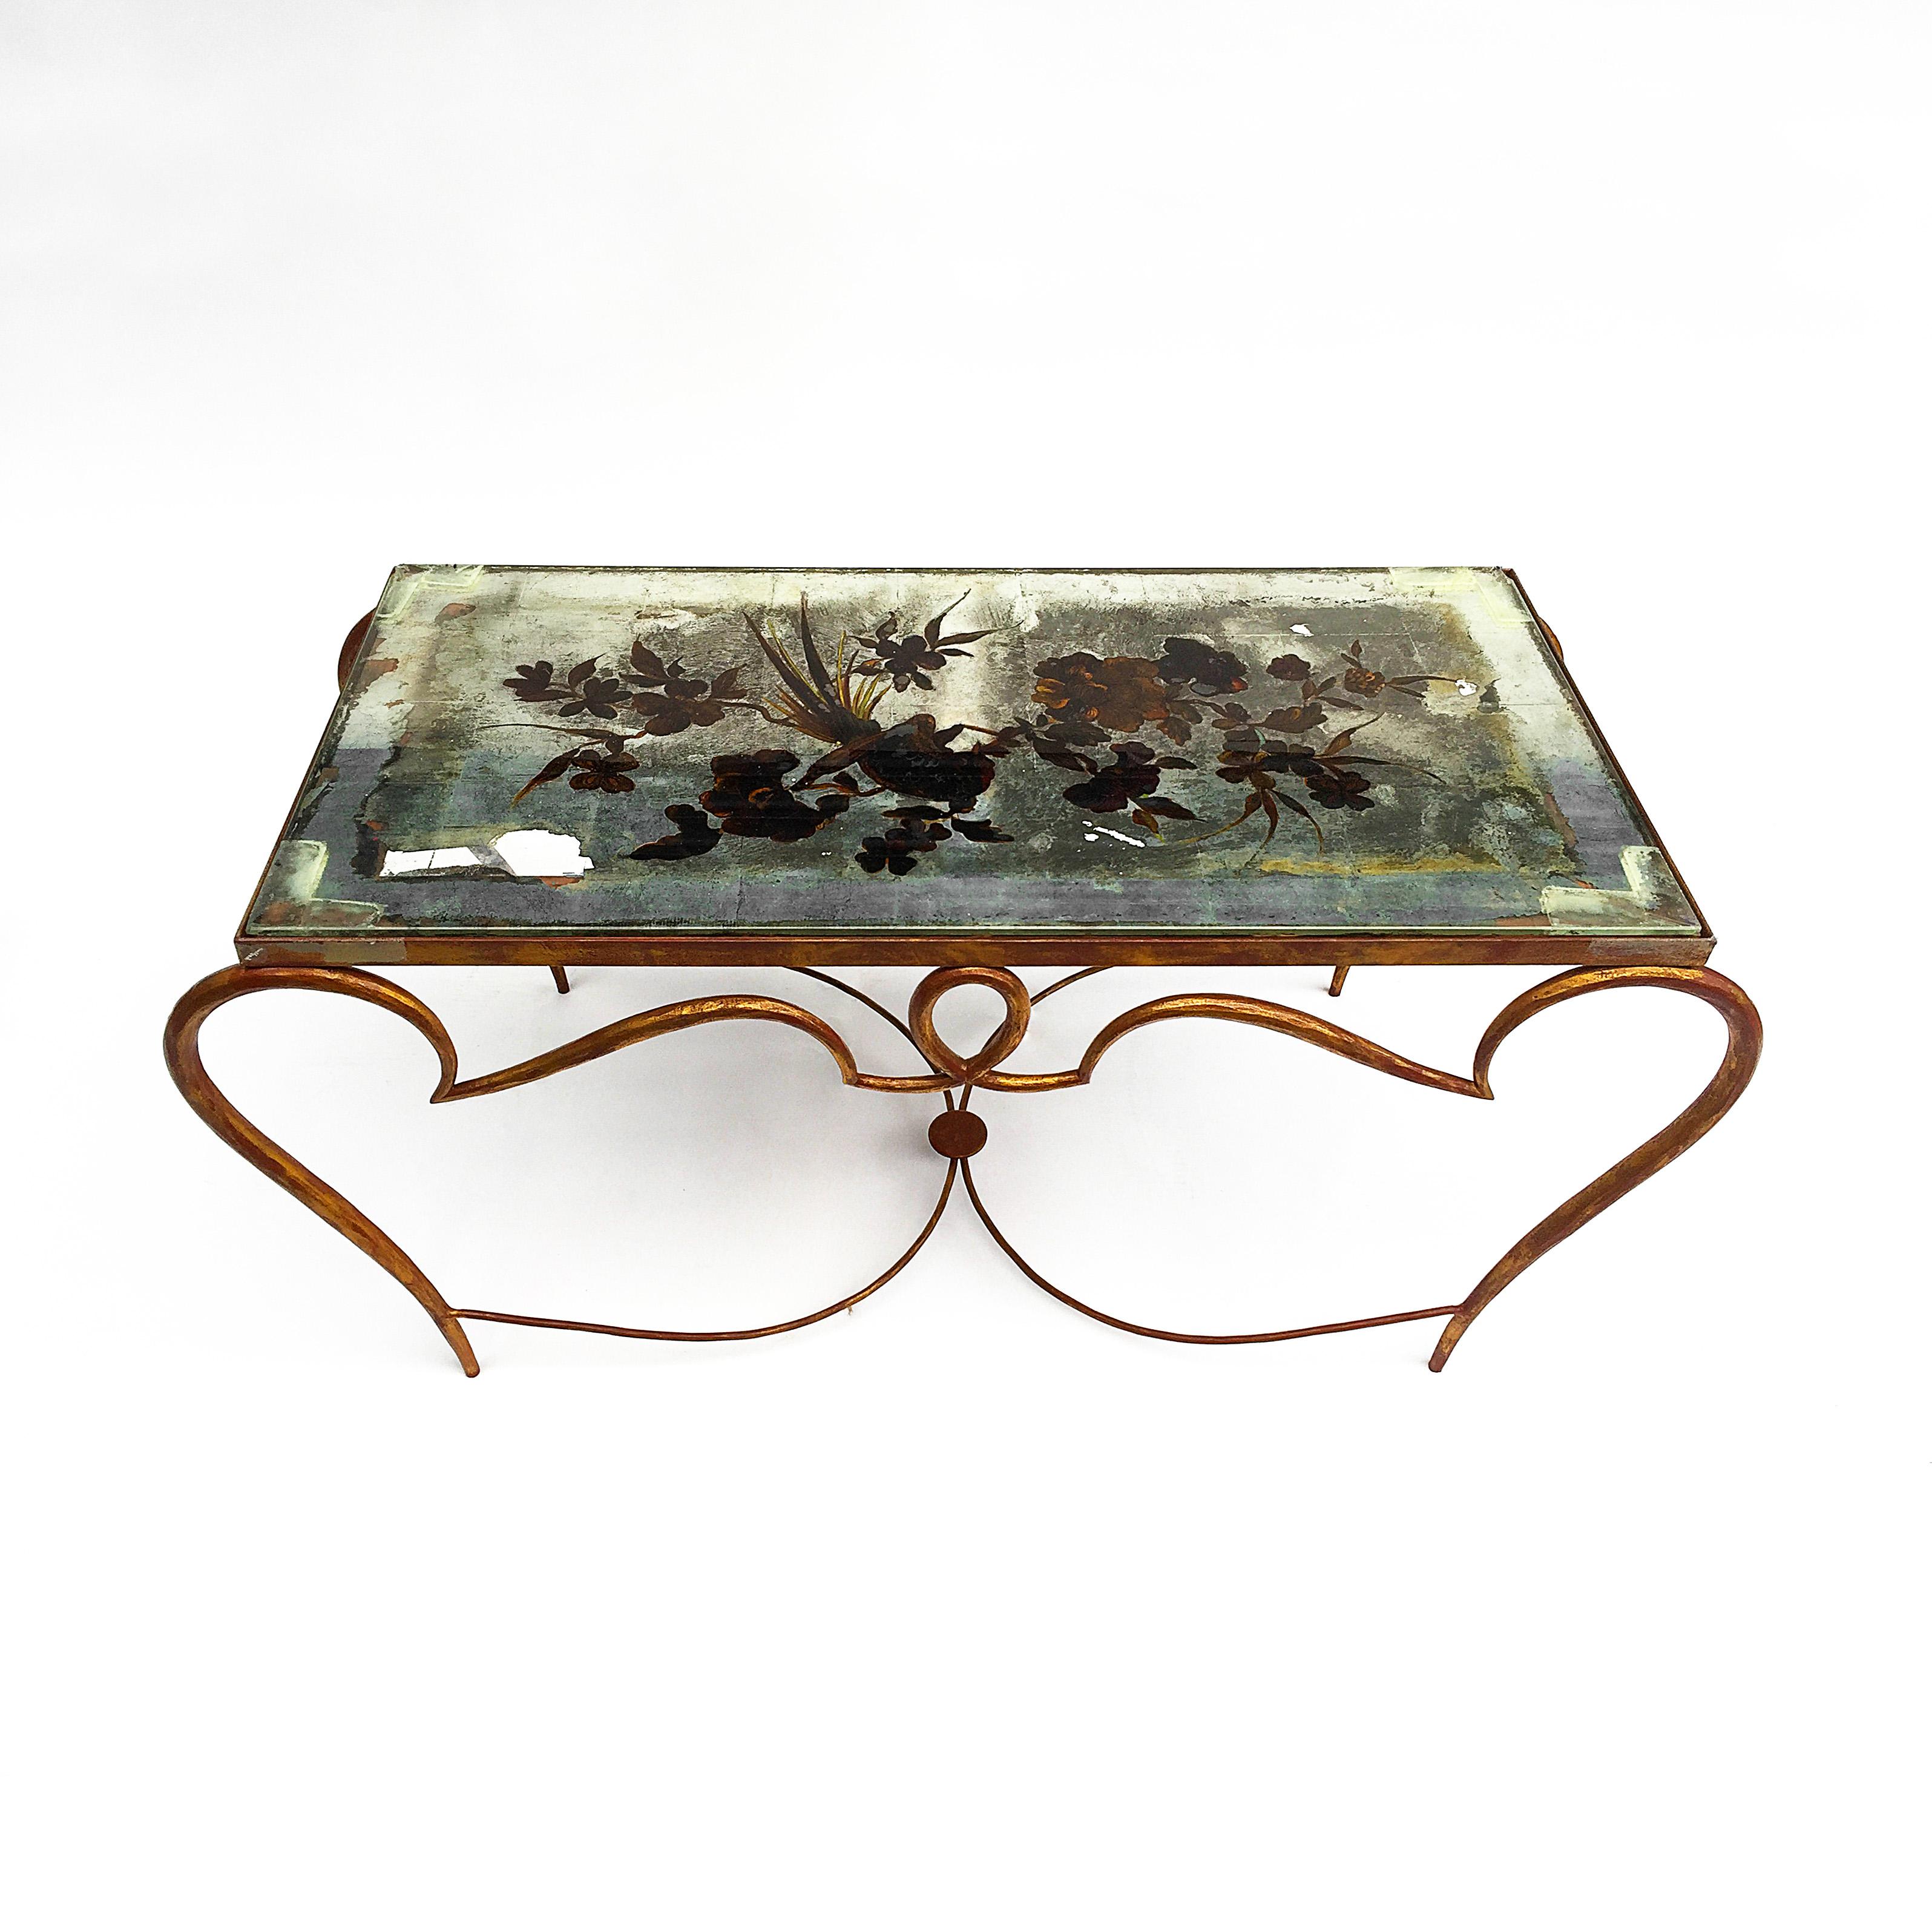 French gilt original cocktail coffee table with its glass by René Drouet. Beautiful forged iron curved gilt legs on red metal surface. Original glass top silver leaf plated surface and gold leaf plated exotic birds and flowers. There is a supported